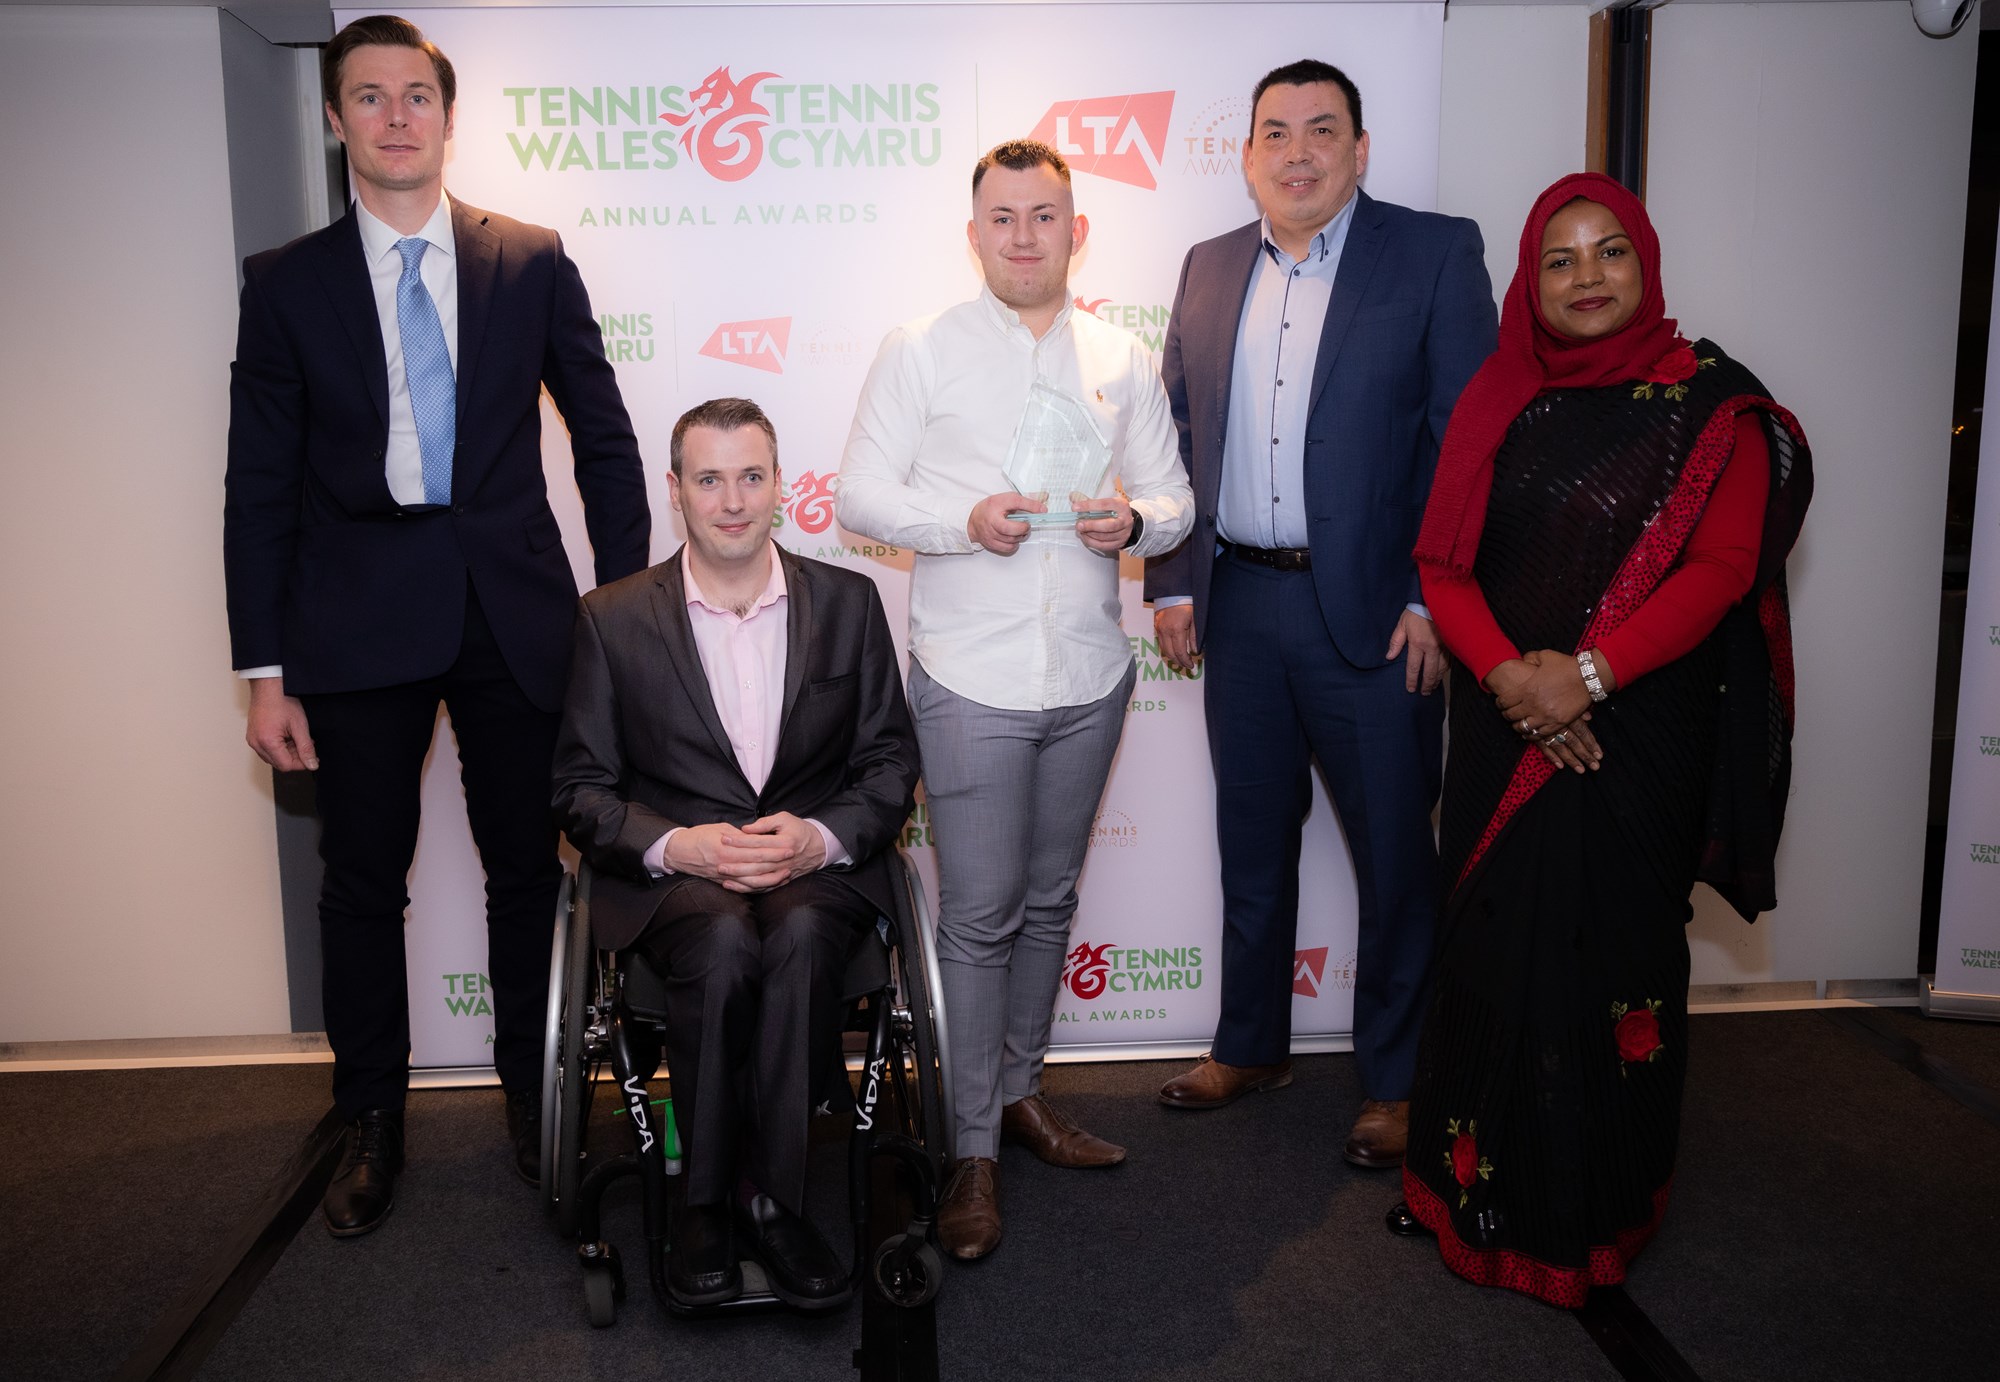 5 people standing at the tennis disability award show